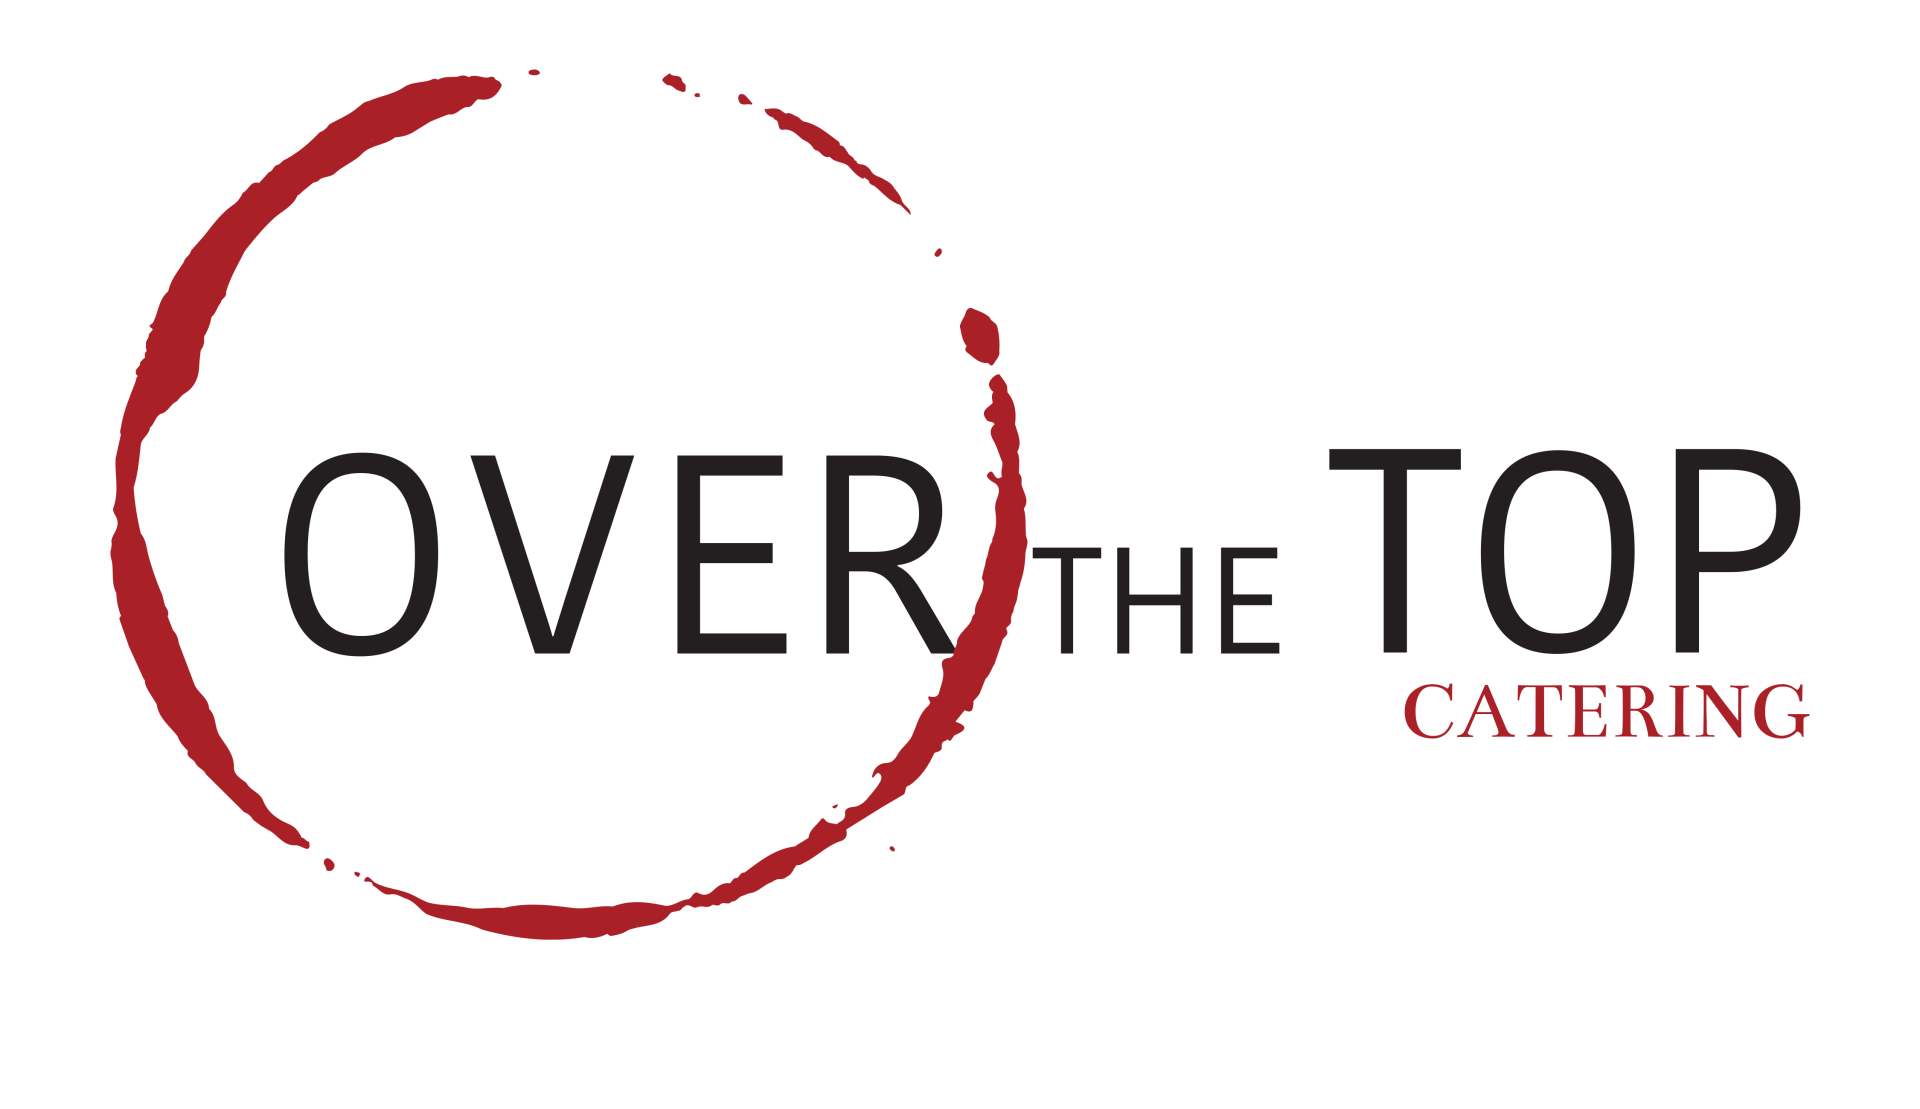 Over the Top logo